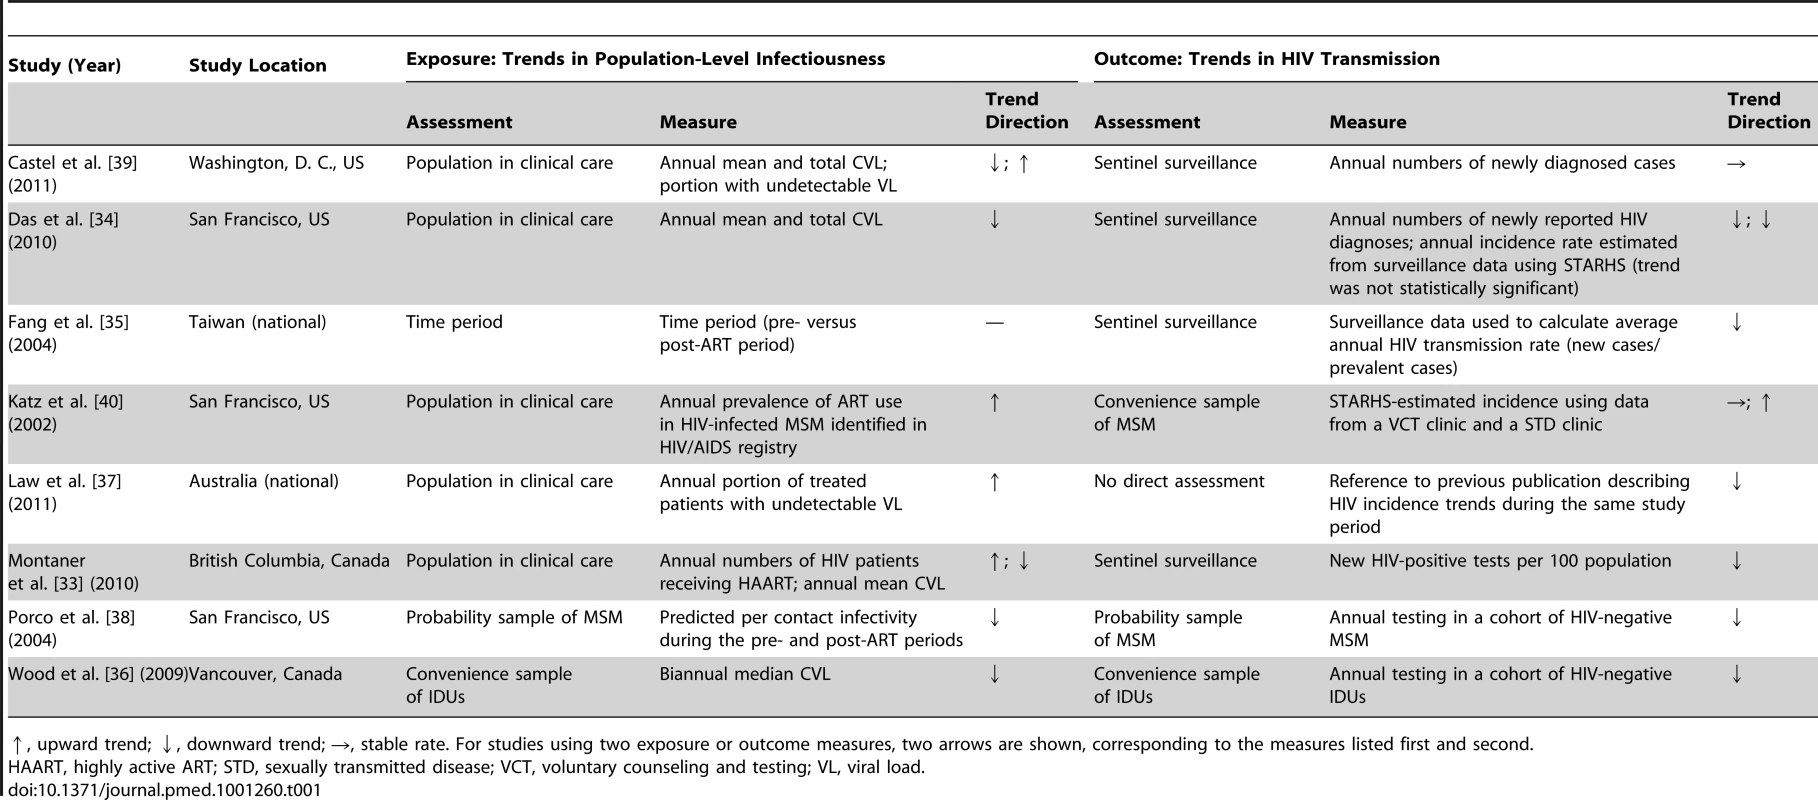 Summary of exposure and outcome measures in studies using ecological measures to assess population-level effects of ART on HIV transmission.